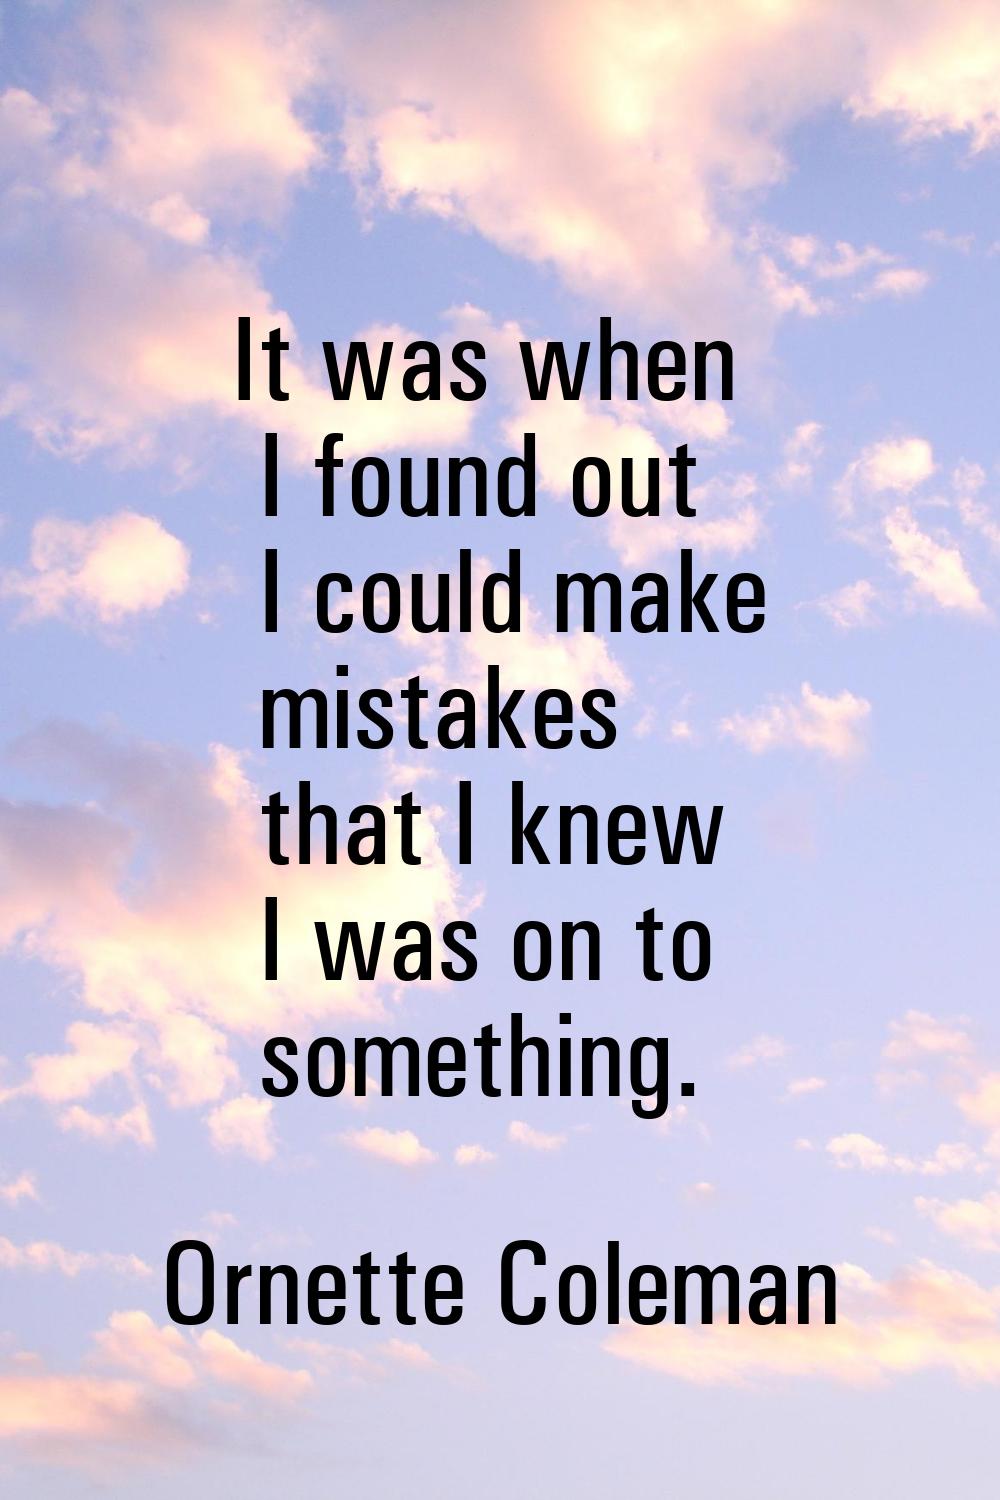 It was when I found out I could make mistakes that I knew I was on to something.